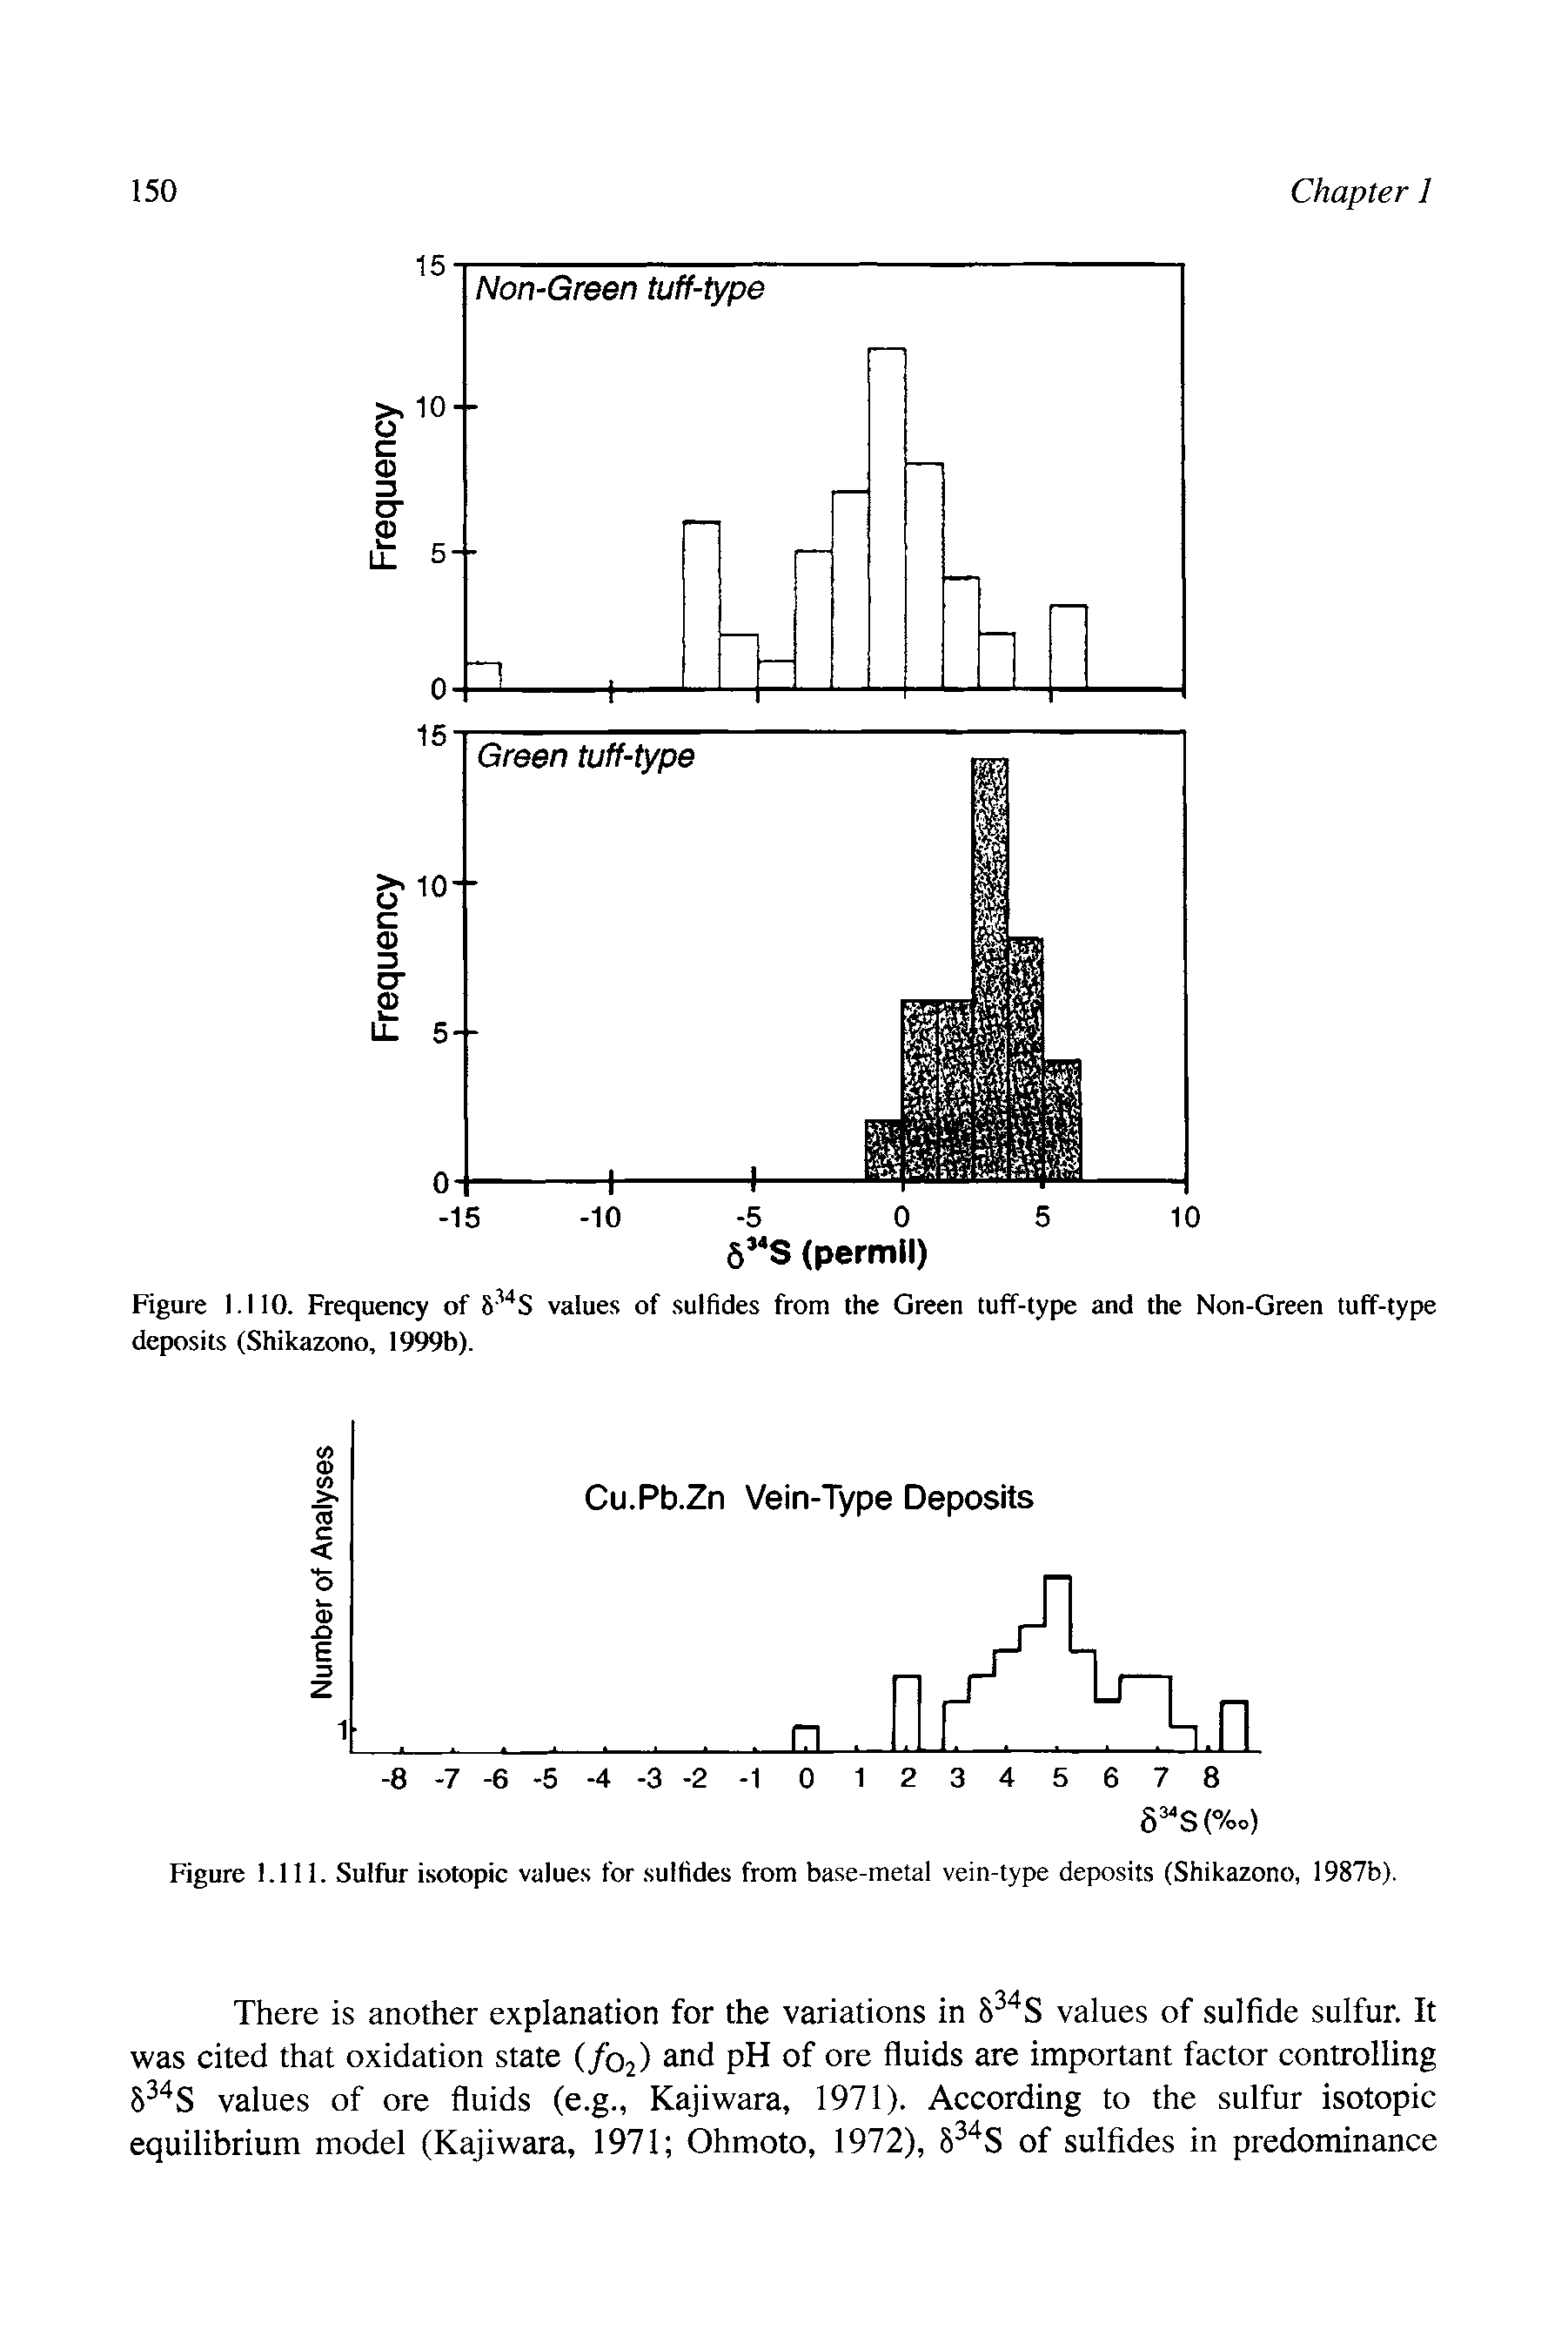 Figure 1.111. Sulfur isotopic values for sulfides from base-metal vein-type deposits (Shikazono, 1987b).